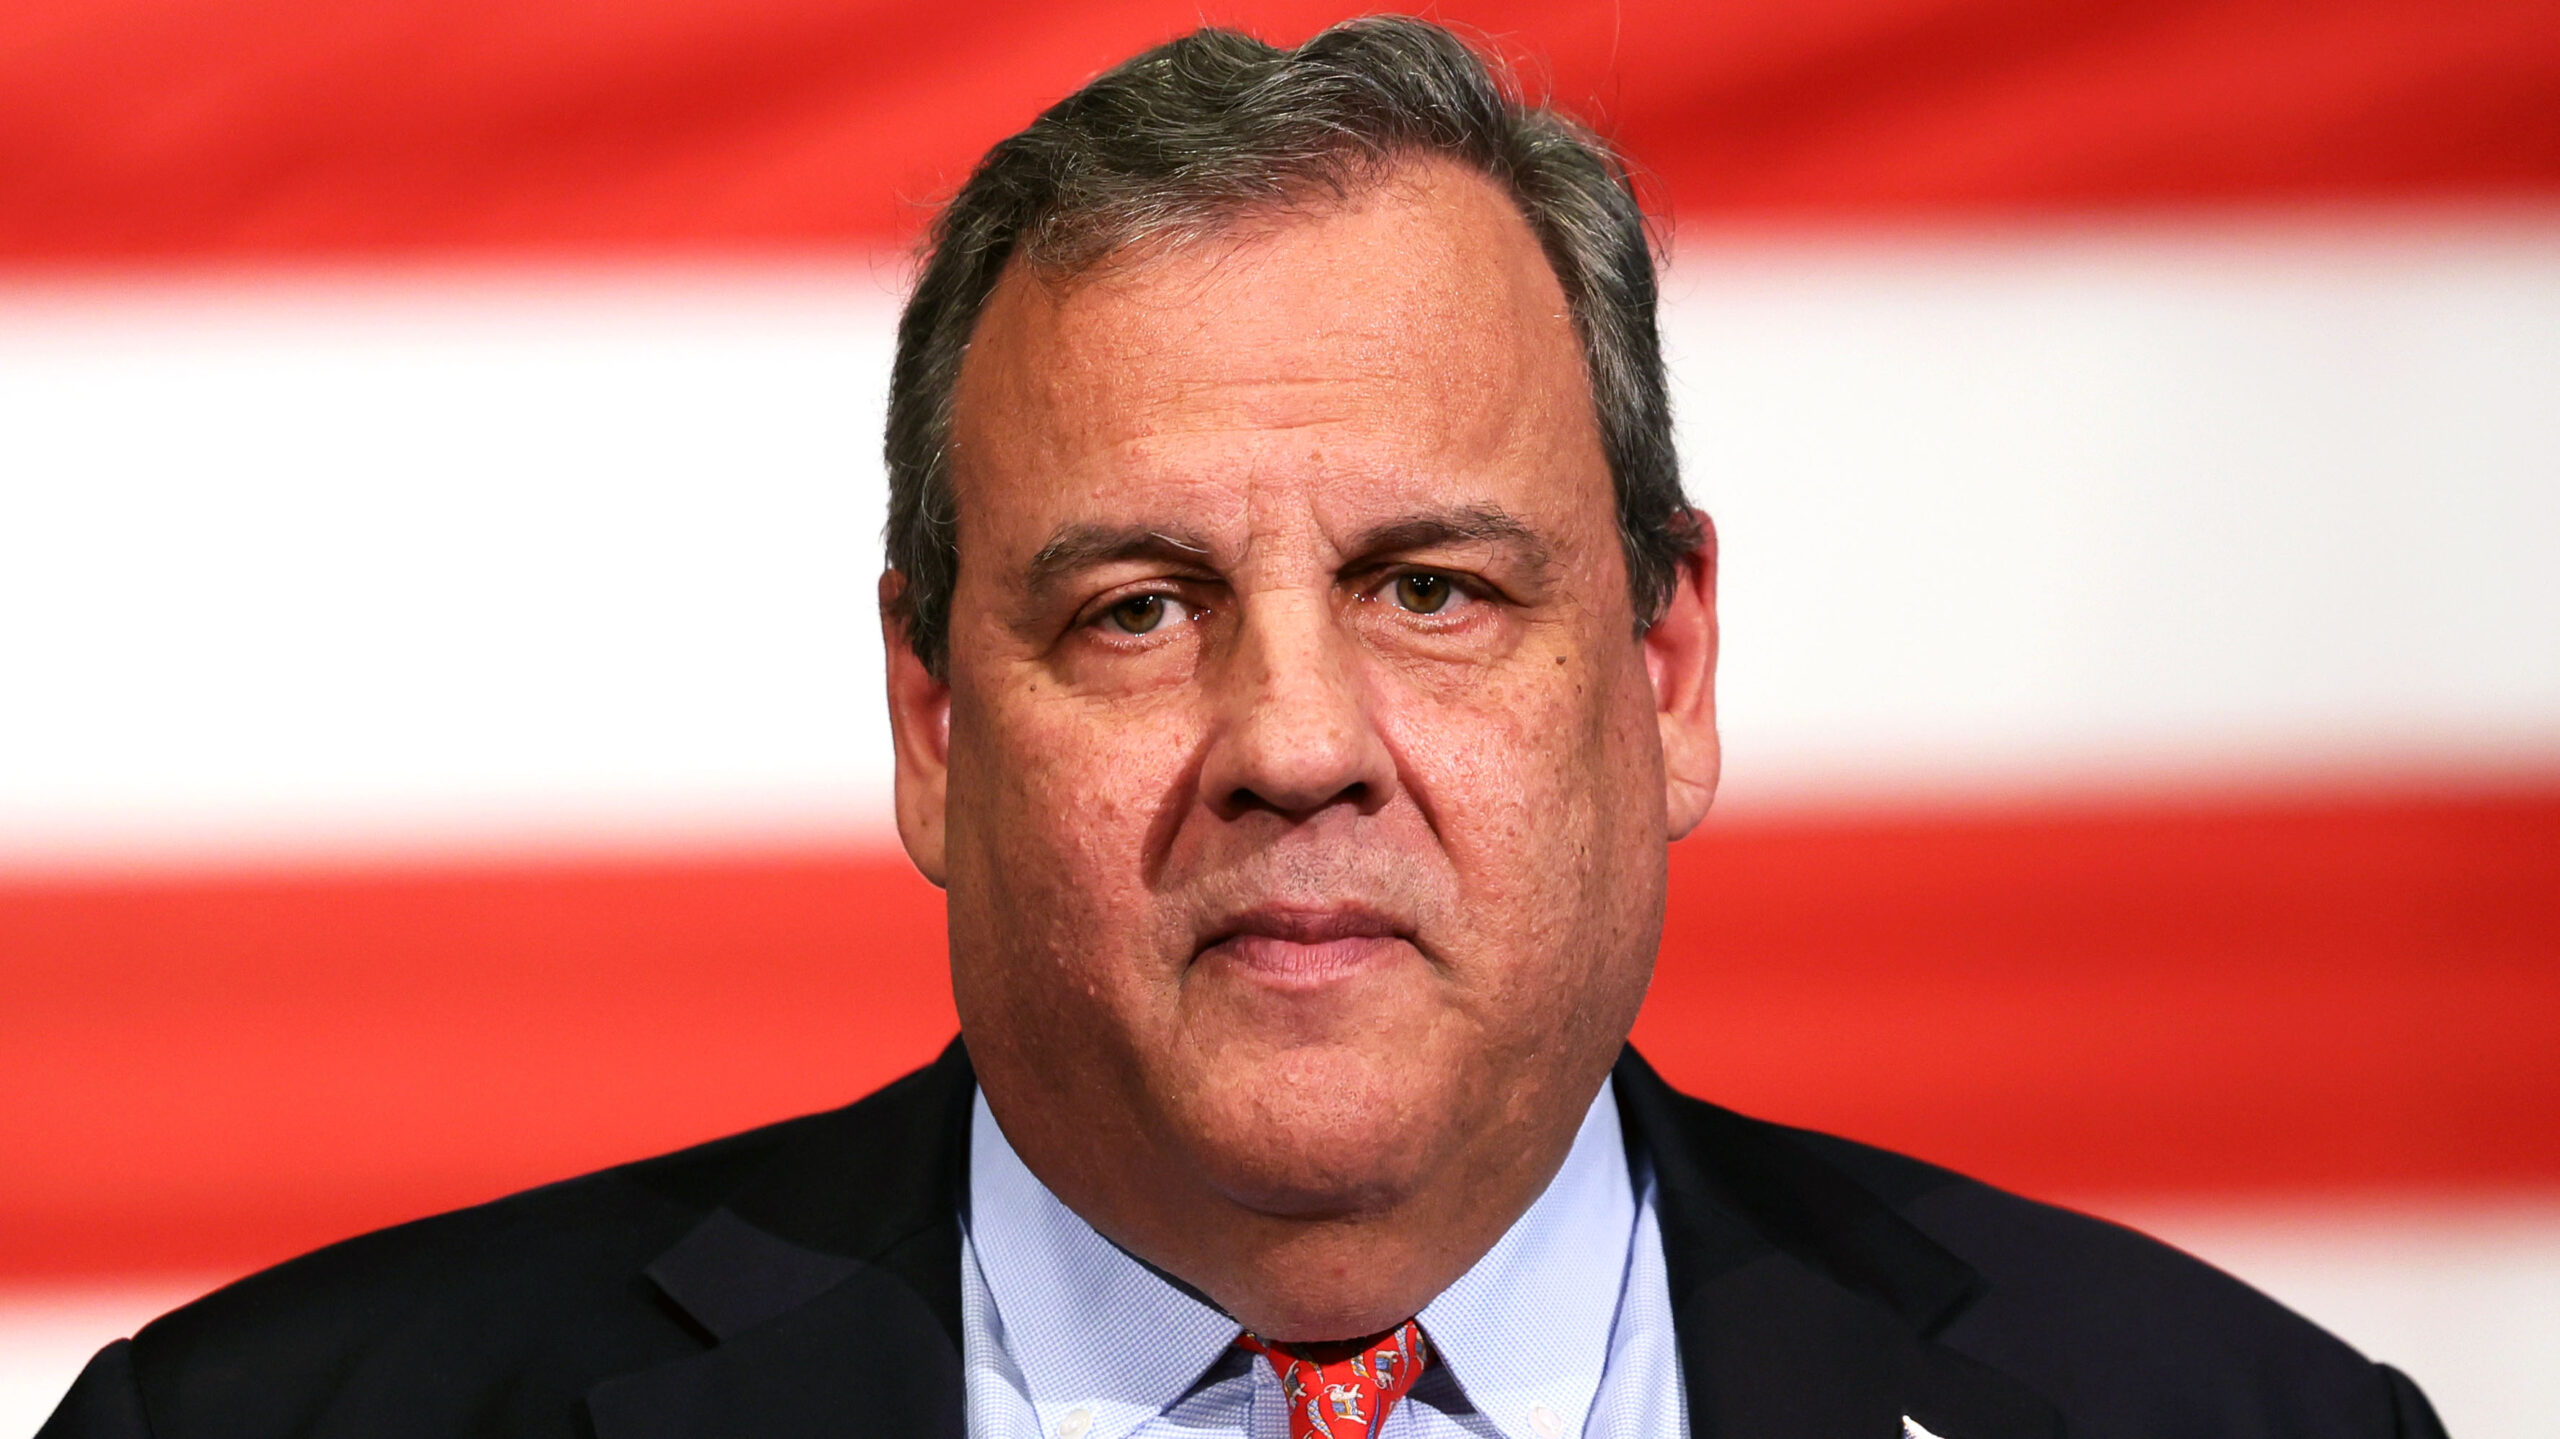 Chris Christie: ‘Biden White House Would Have Been Happier If He Had Been Charged’ Instead Of Hur’s Report Coming Out